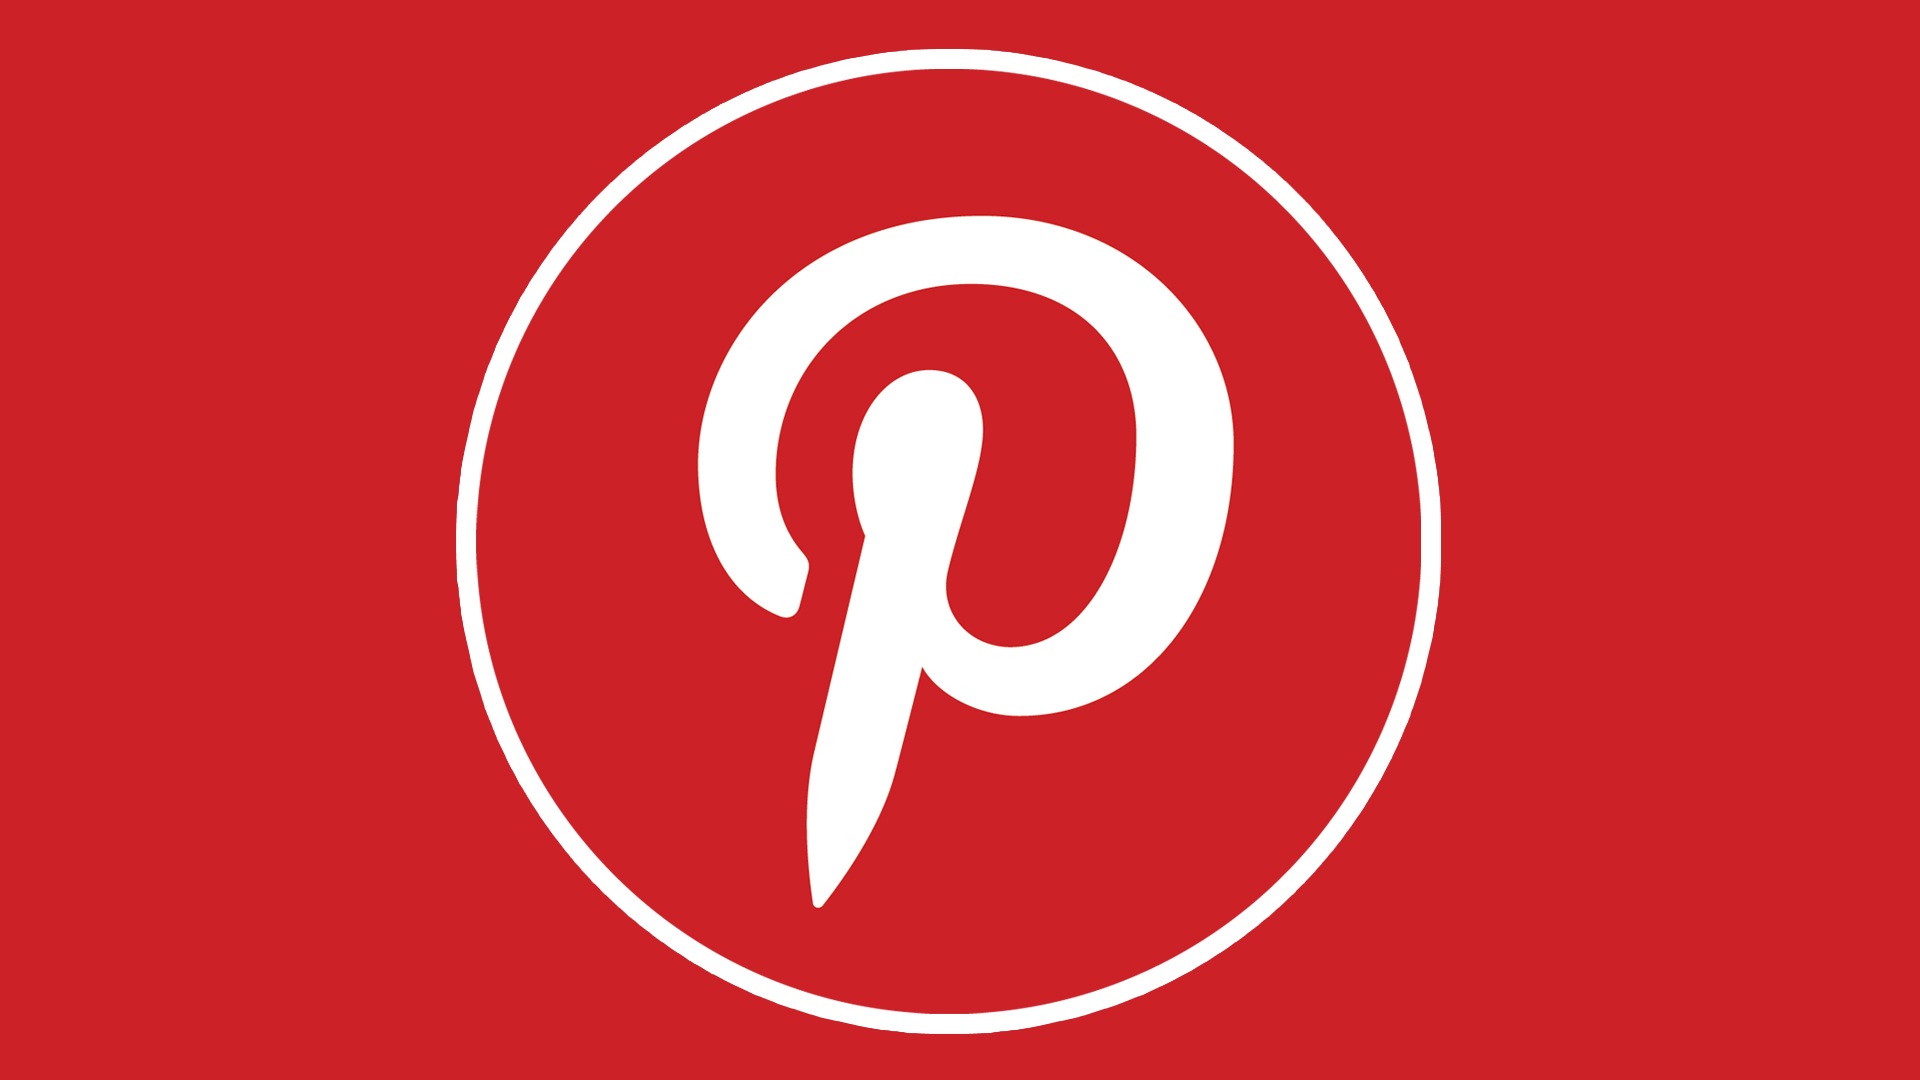 How to Push the Pinterest Limits for PR & Social Commerce